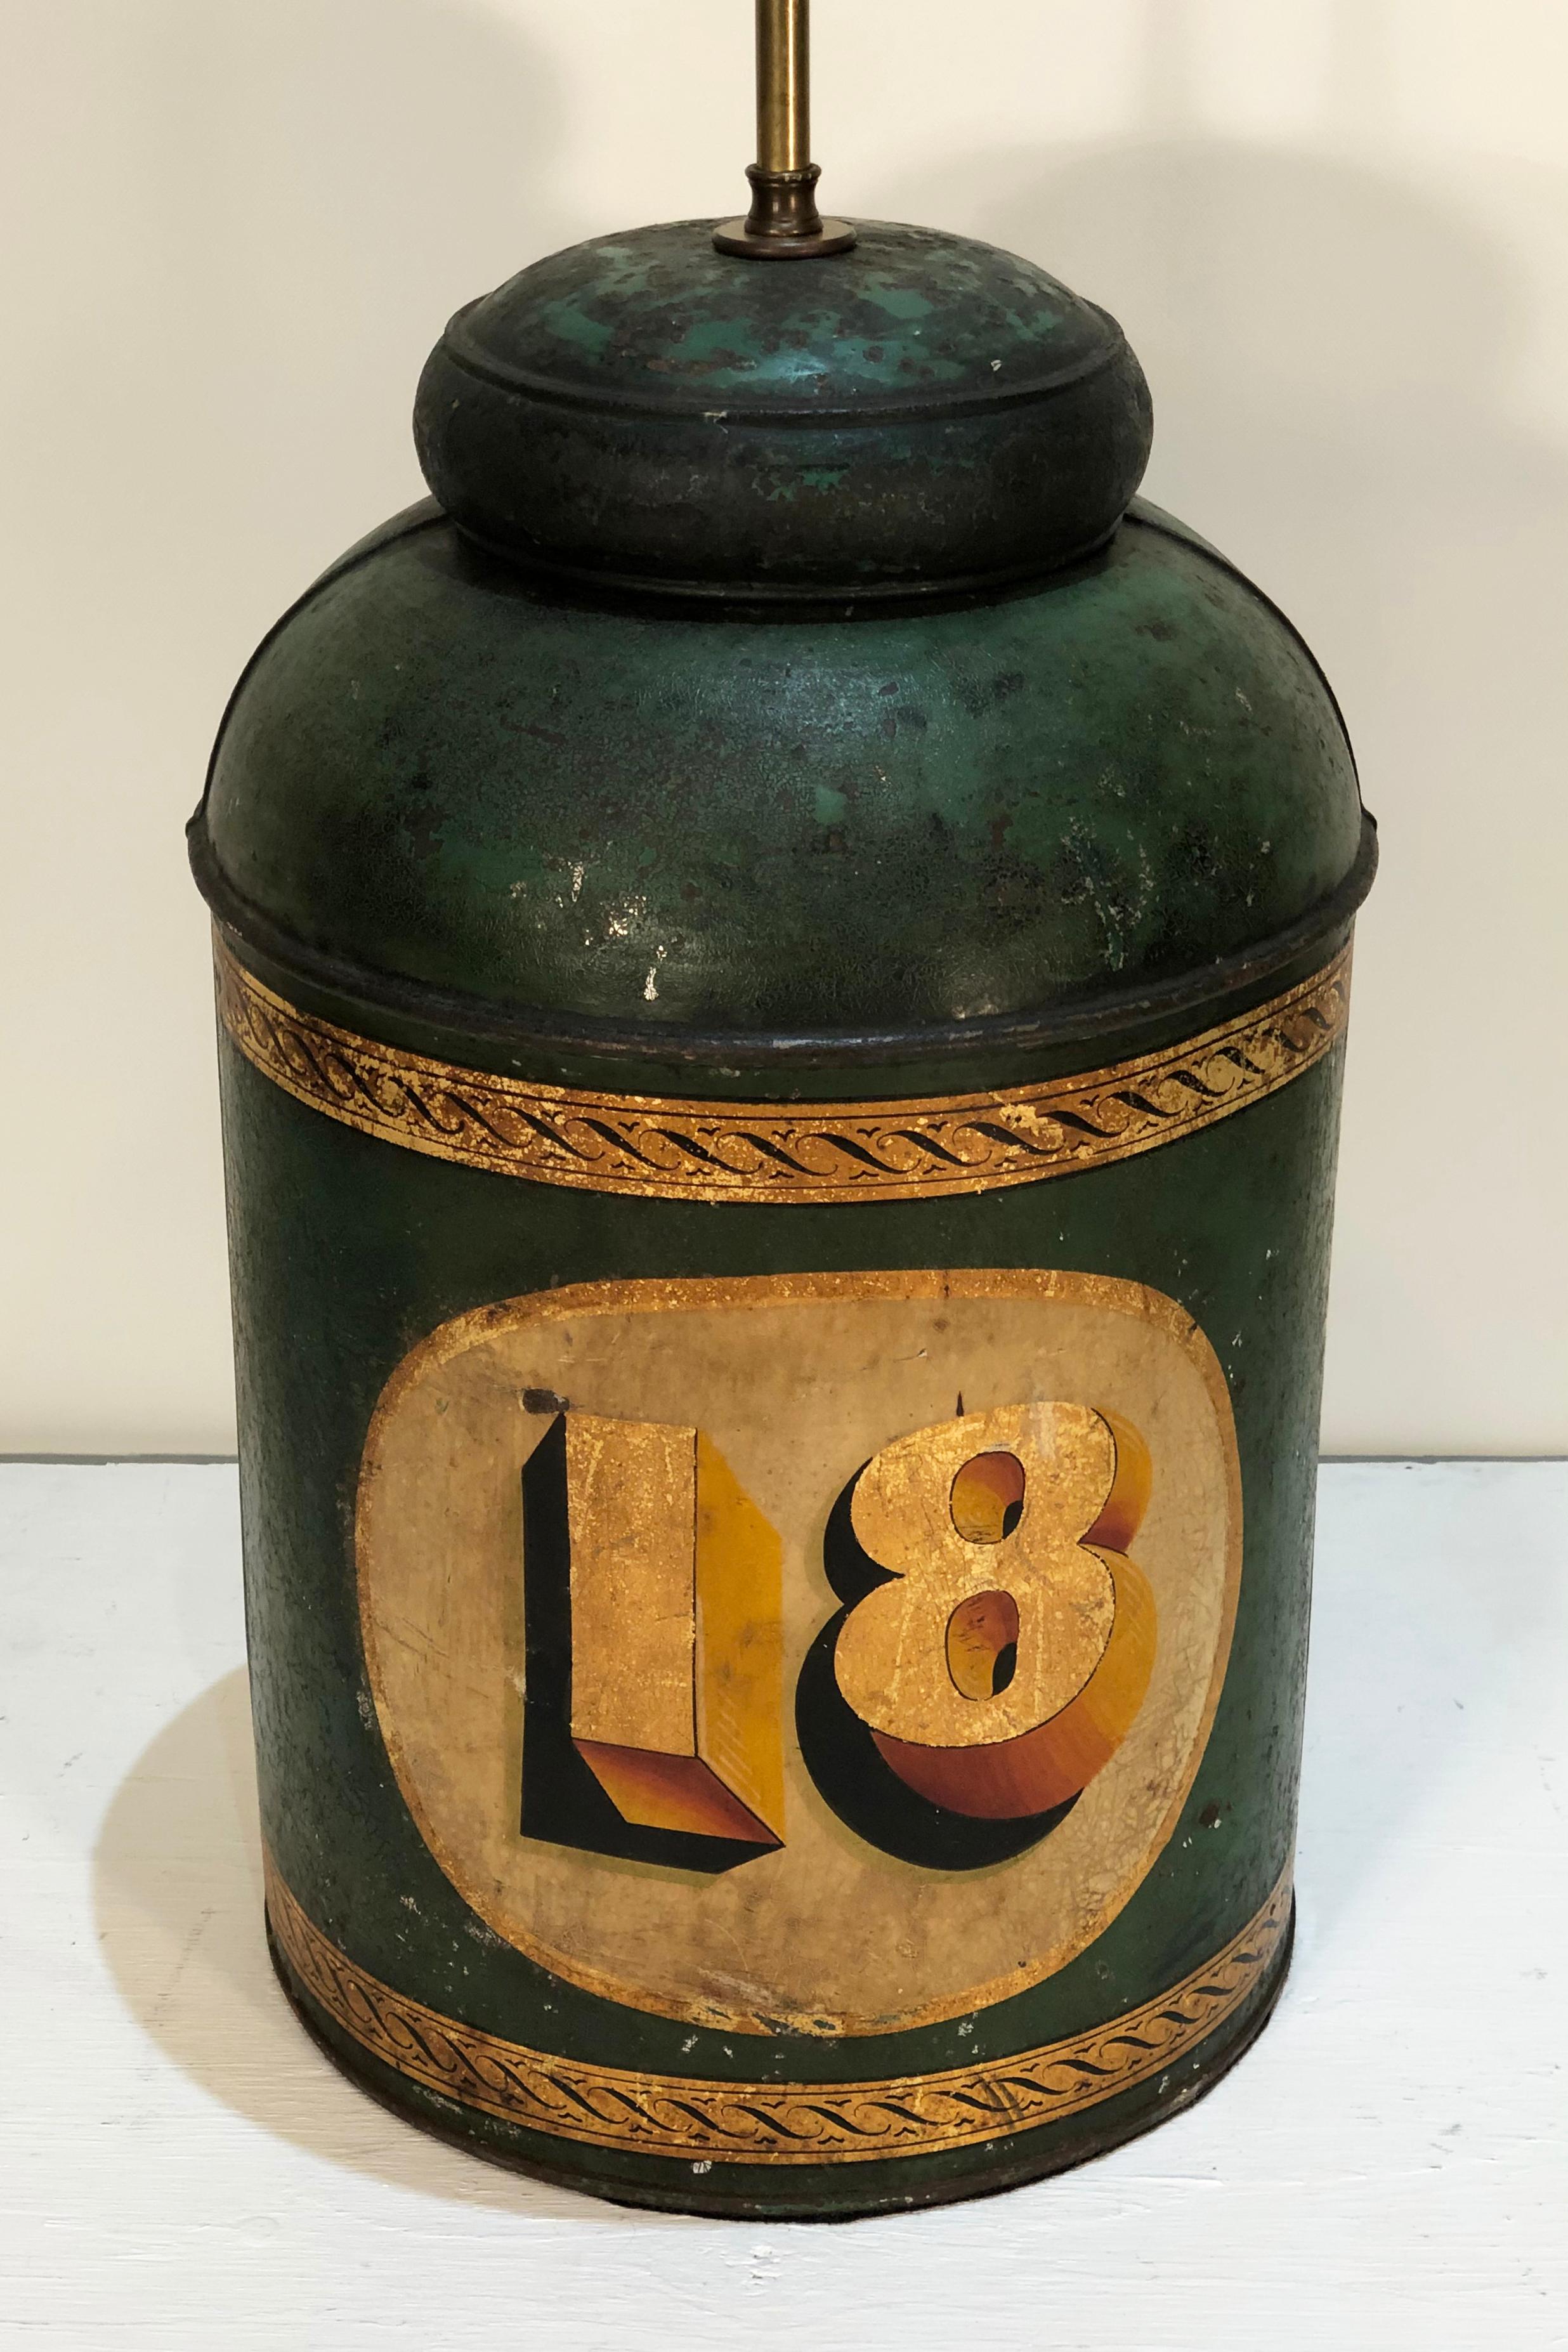 Wonderfully decorated mid-19th century English Tole Spice/Tea Canister, now as a Lamp. This tea/spice canister is #18 in size and retains the original paint and stencilling. Double Edison chain pull sockets with brown raycon cord.
Canister itself